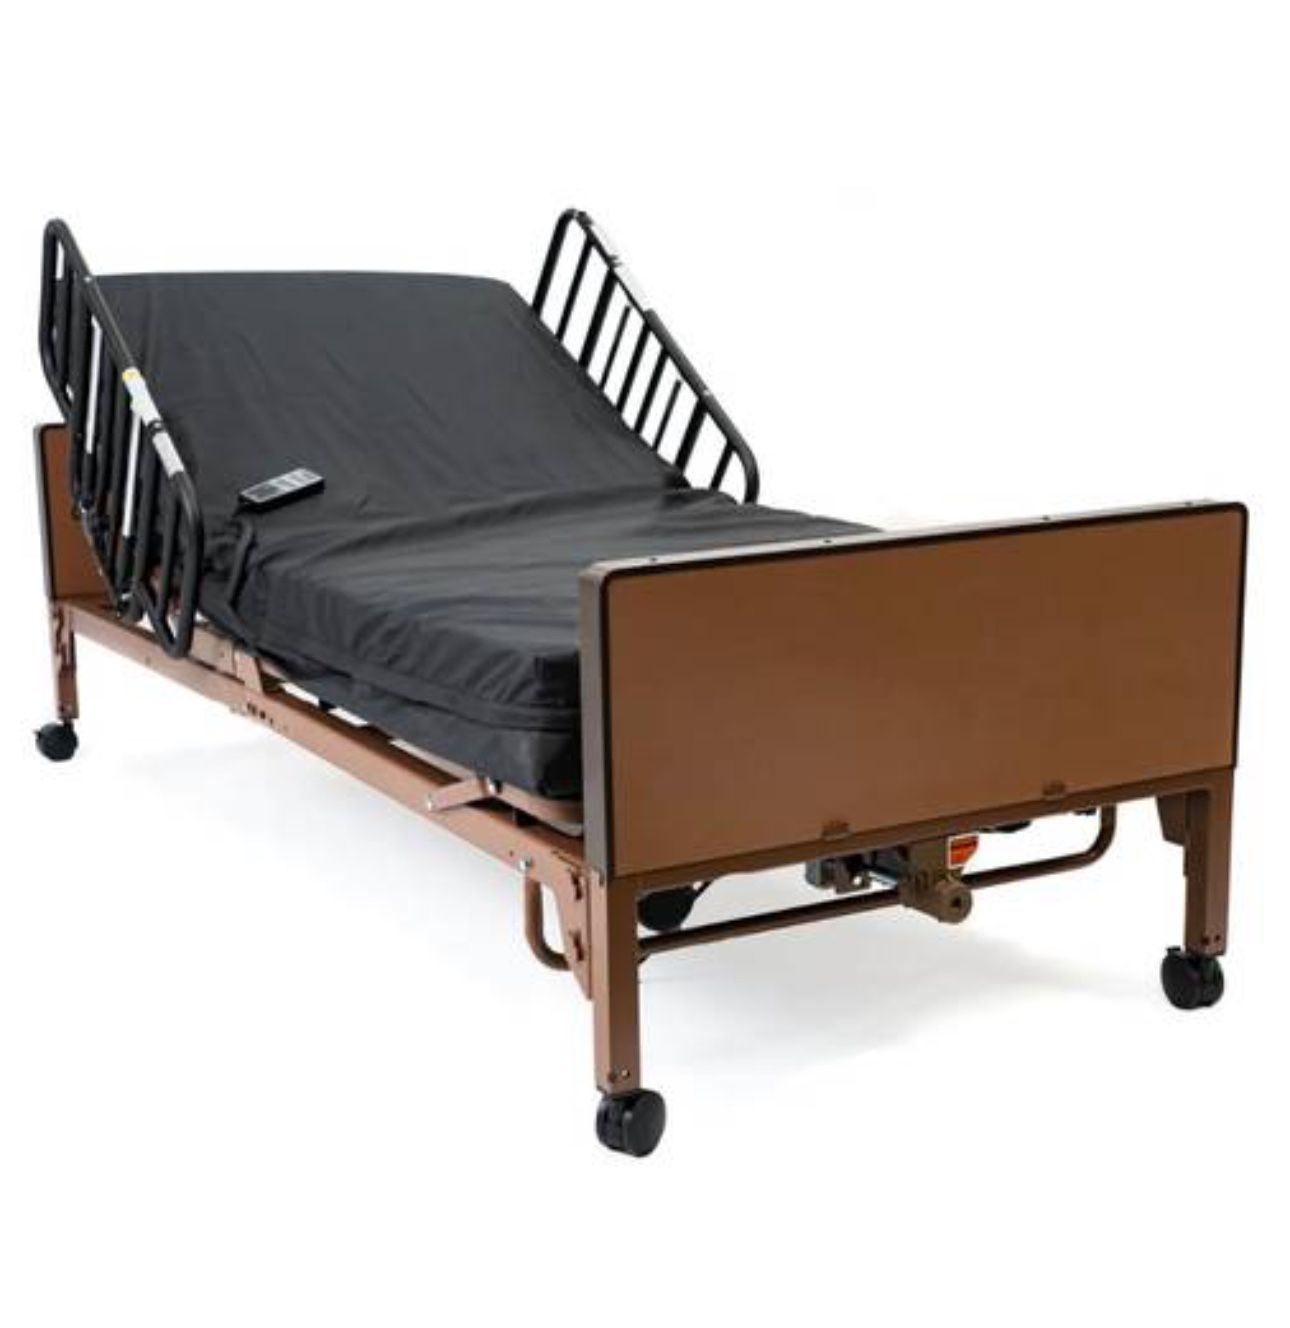 Fully automated Hospital Bed Barely Used